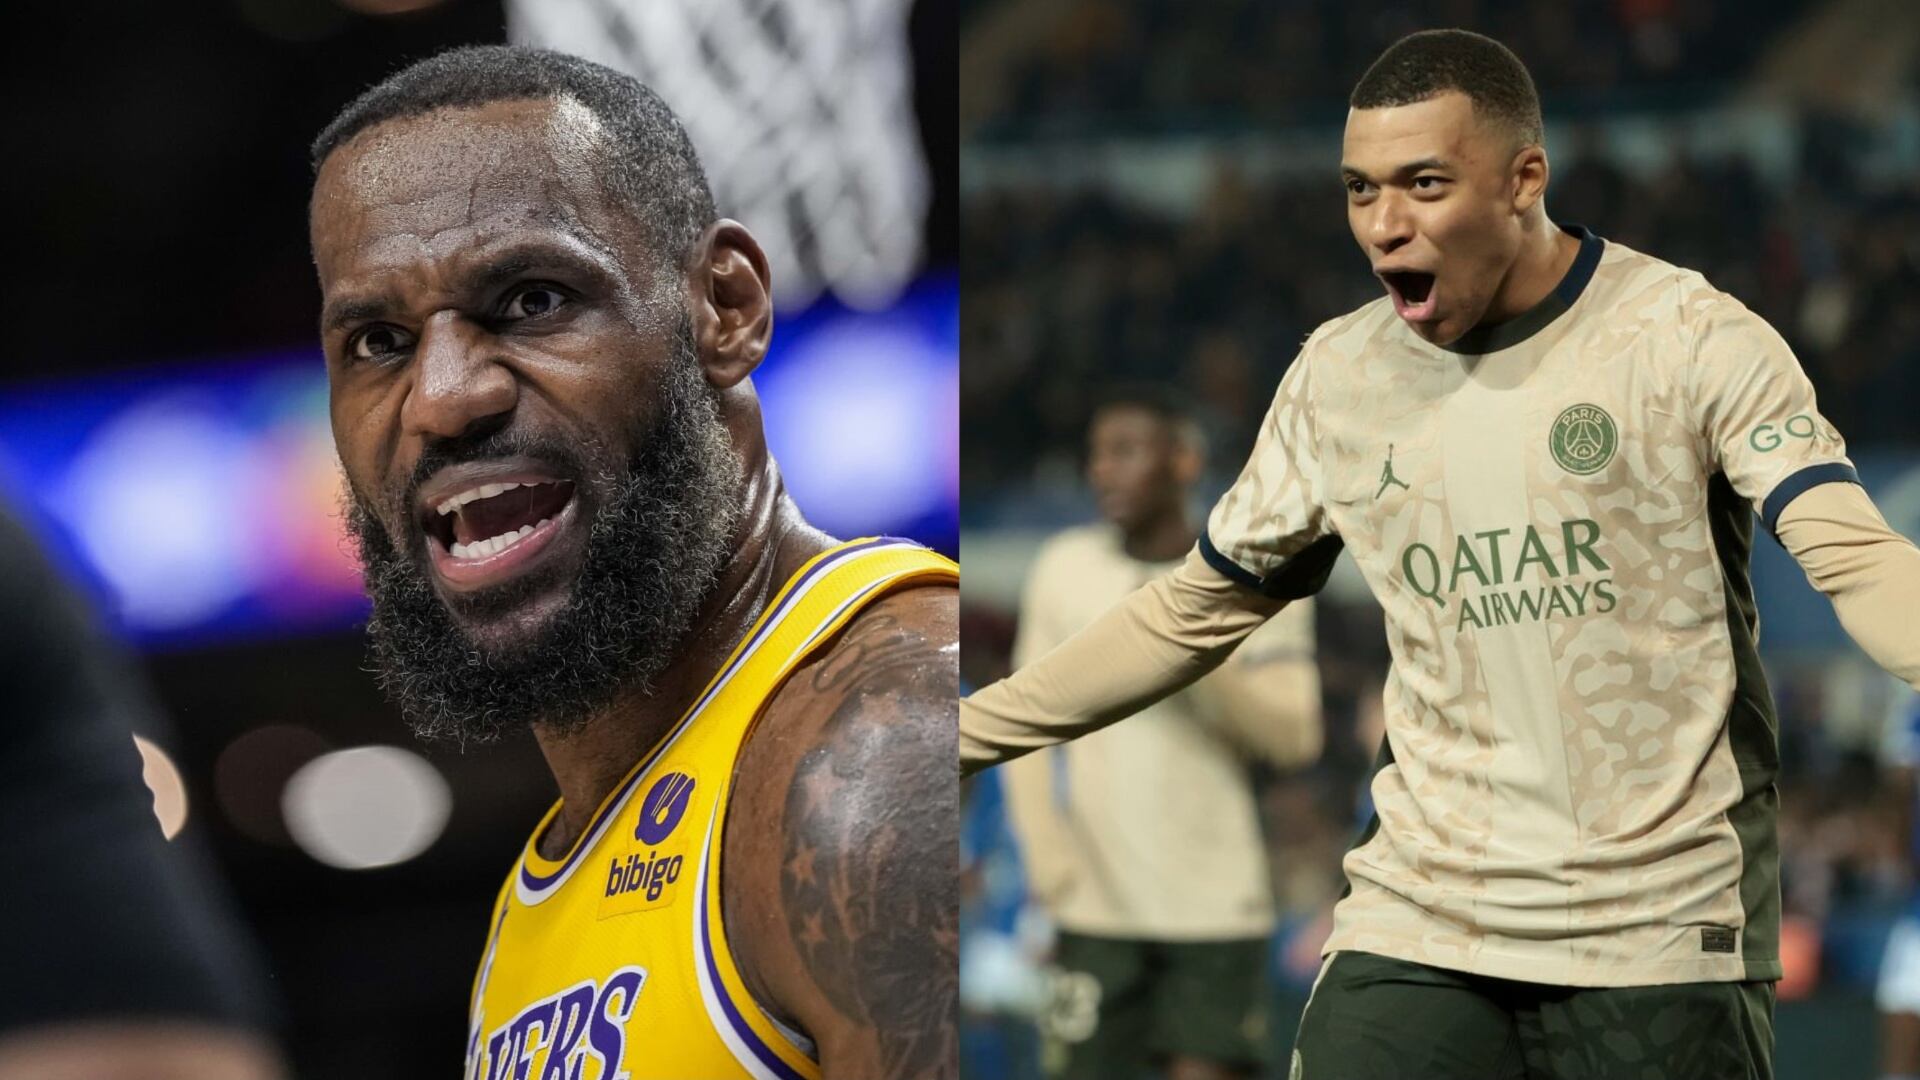 LeBron James is the richest baskteball player, but doesn't make more than Mbappe